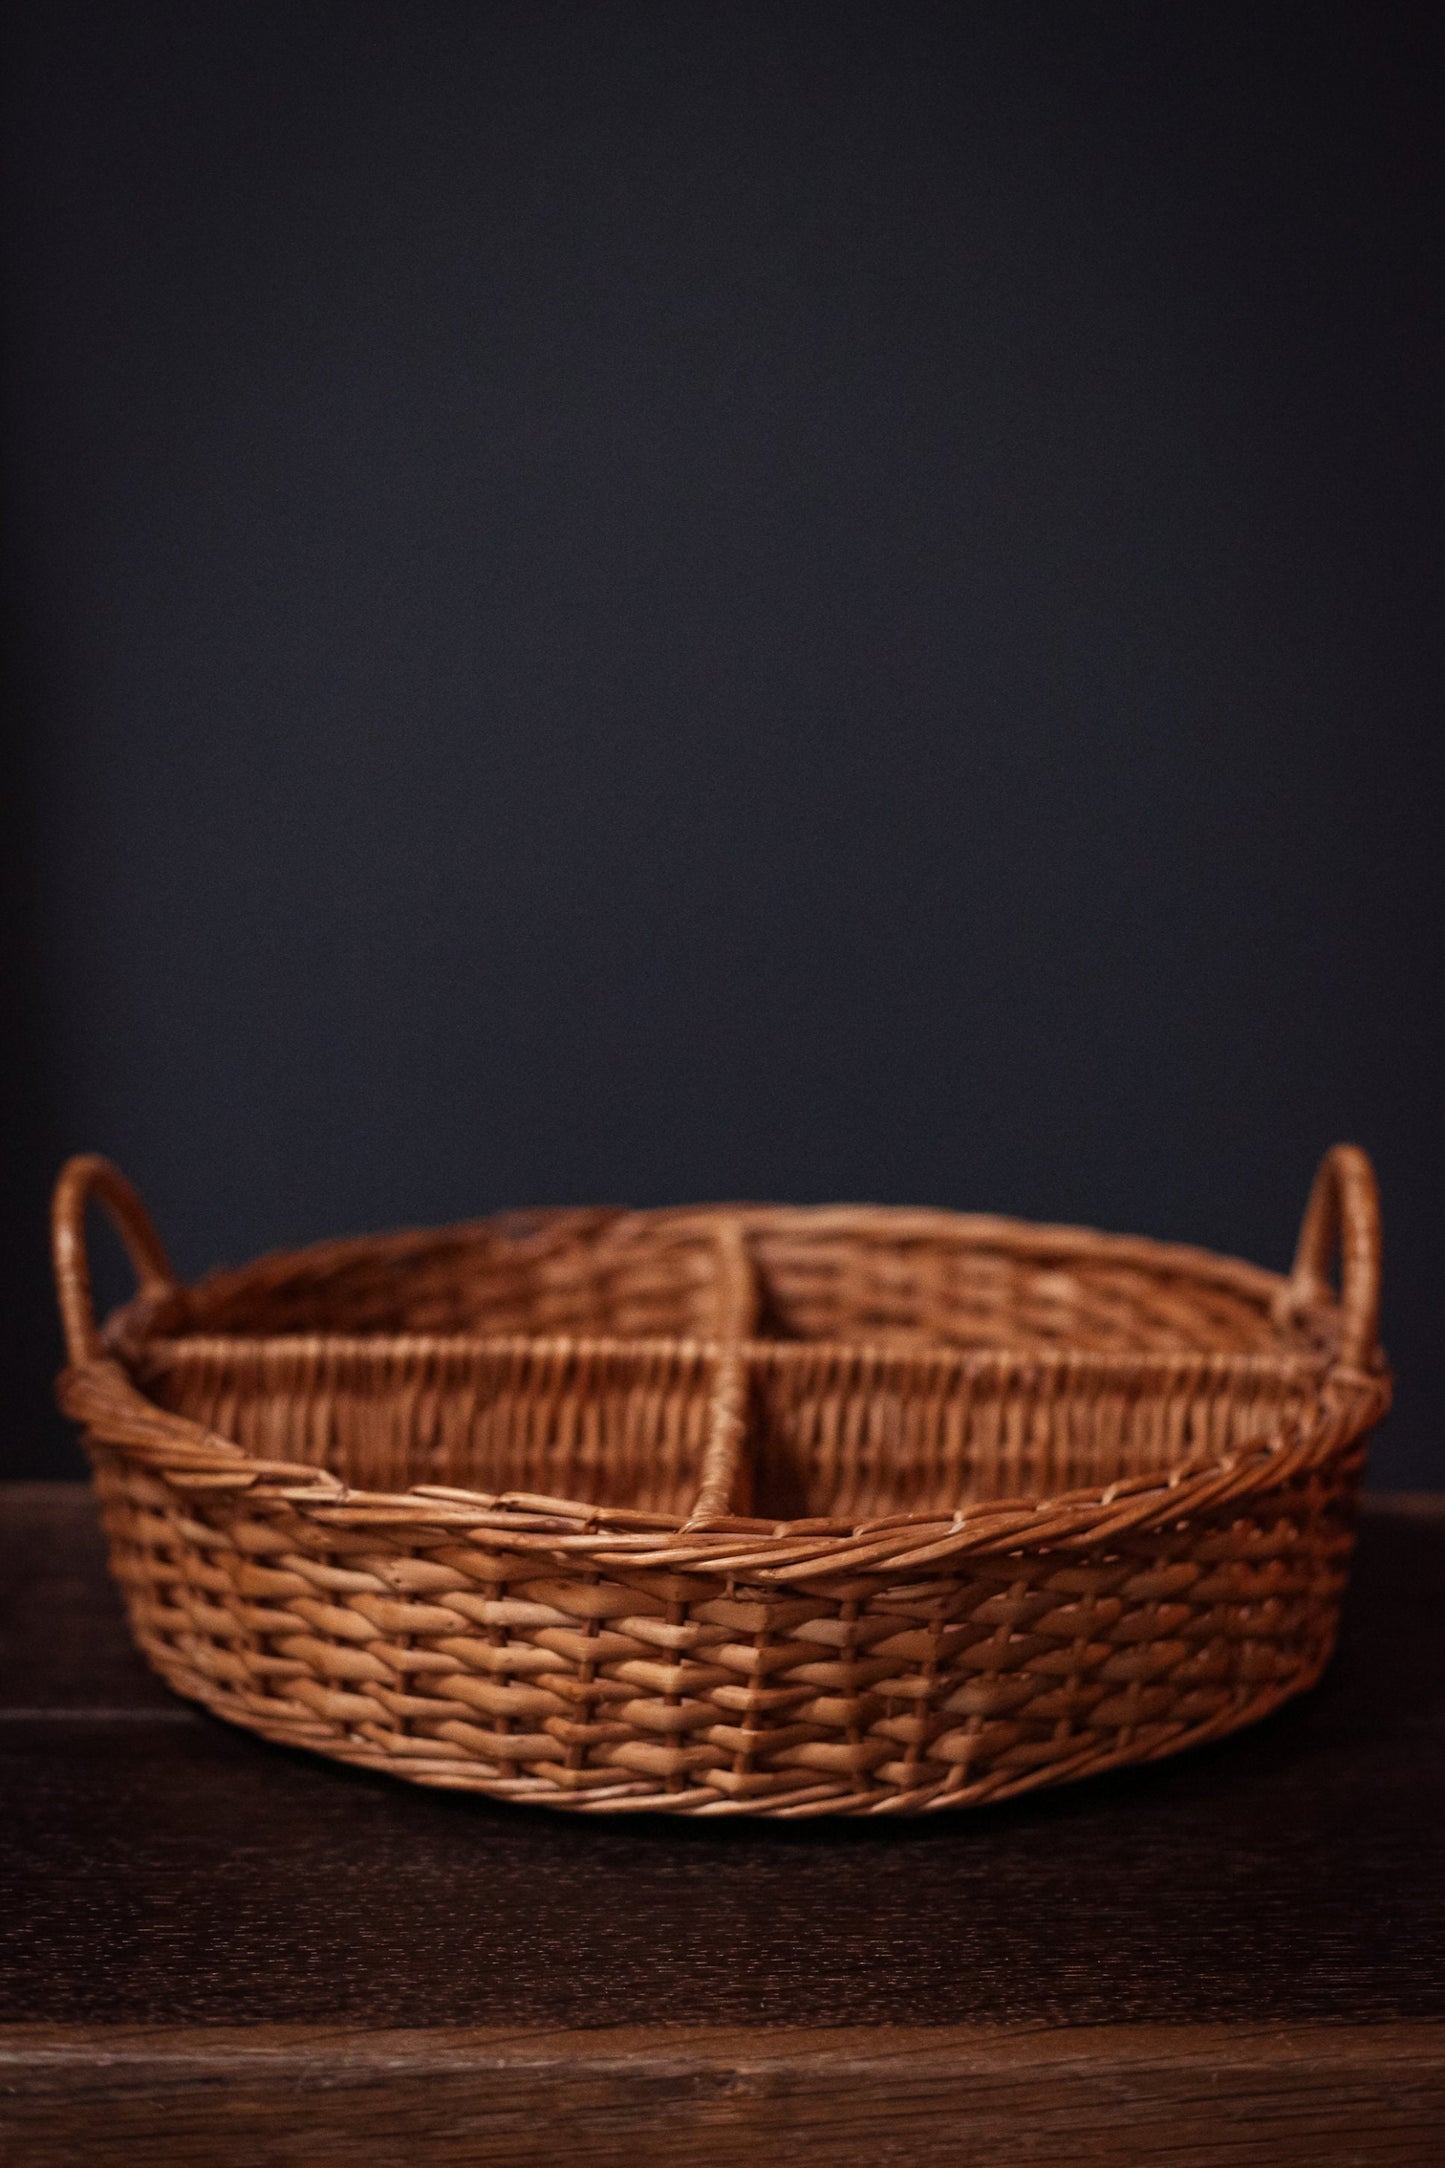 Divided Console Basket with Handles - Round Wicker/Rattan Modern Farmhouse Basket